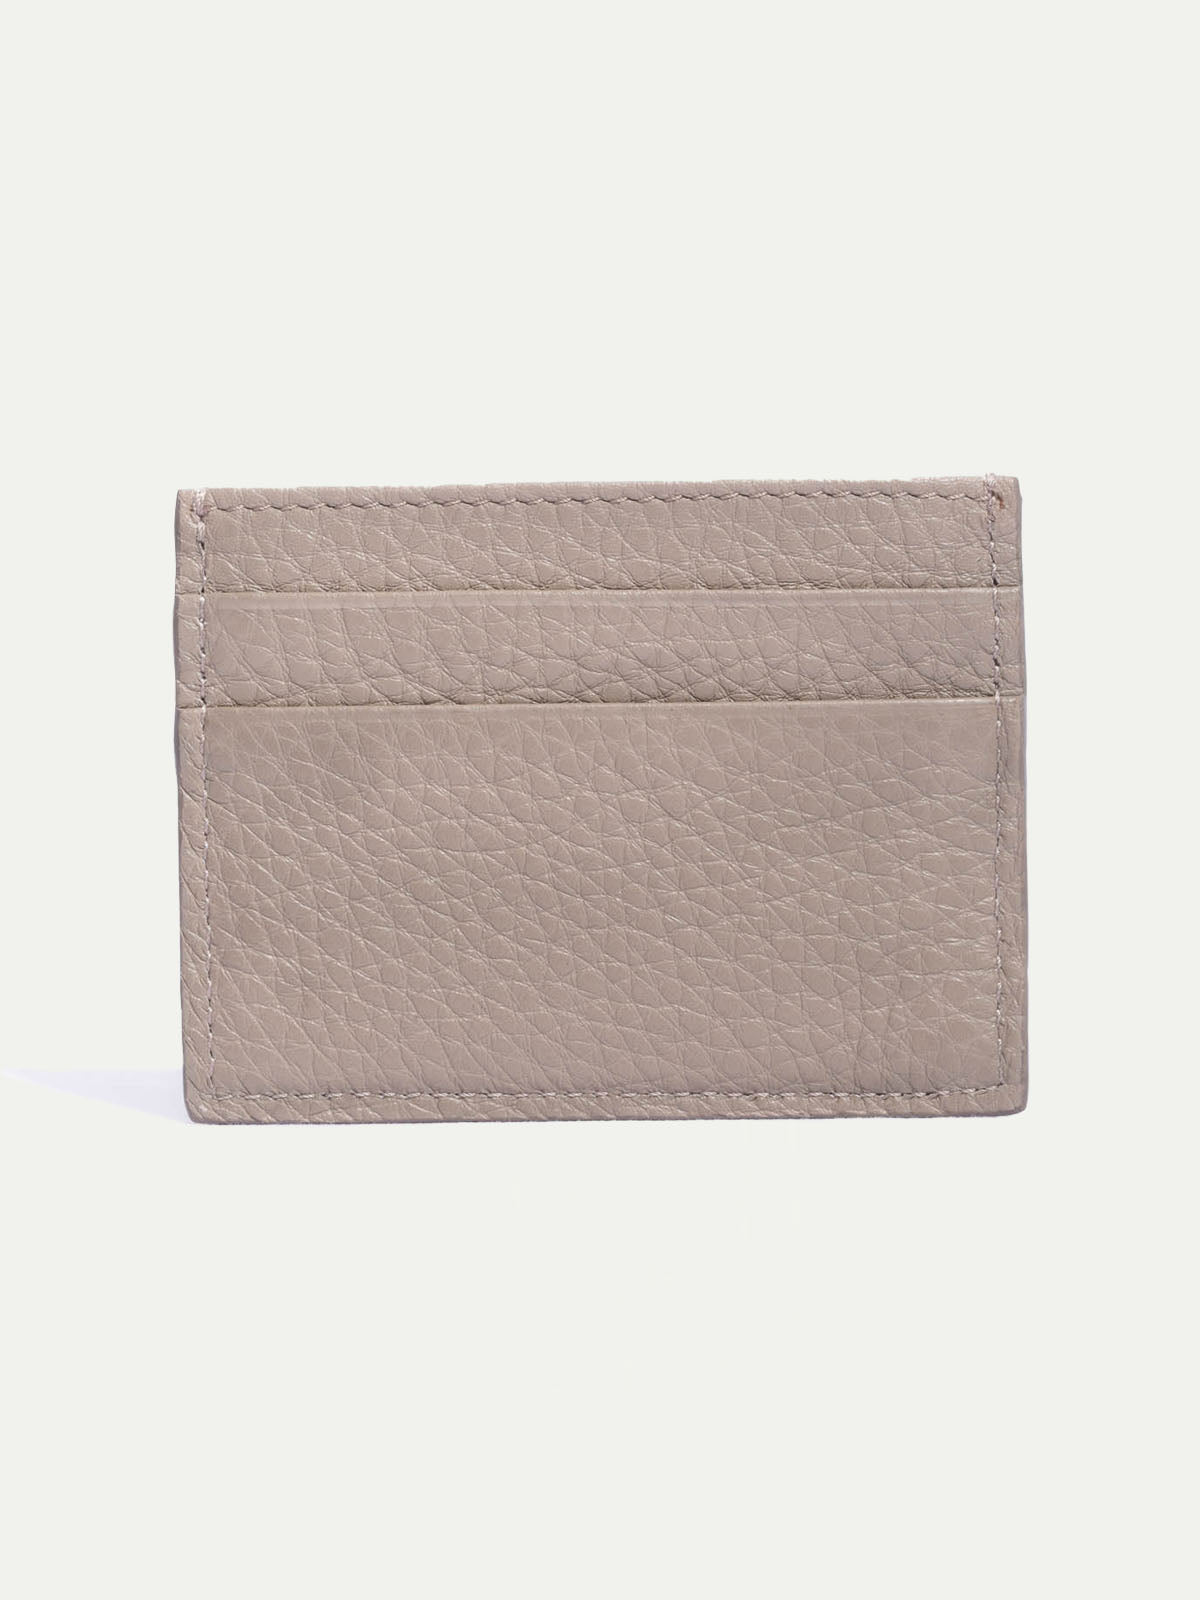 Porte-cartes en cuir taupe - Made in Italy